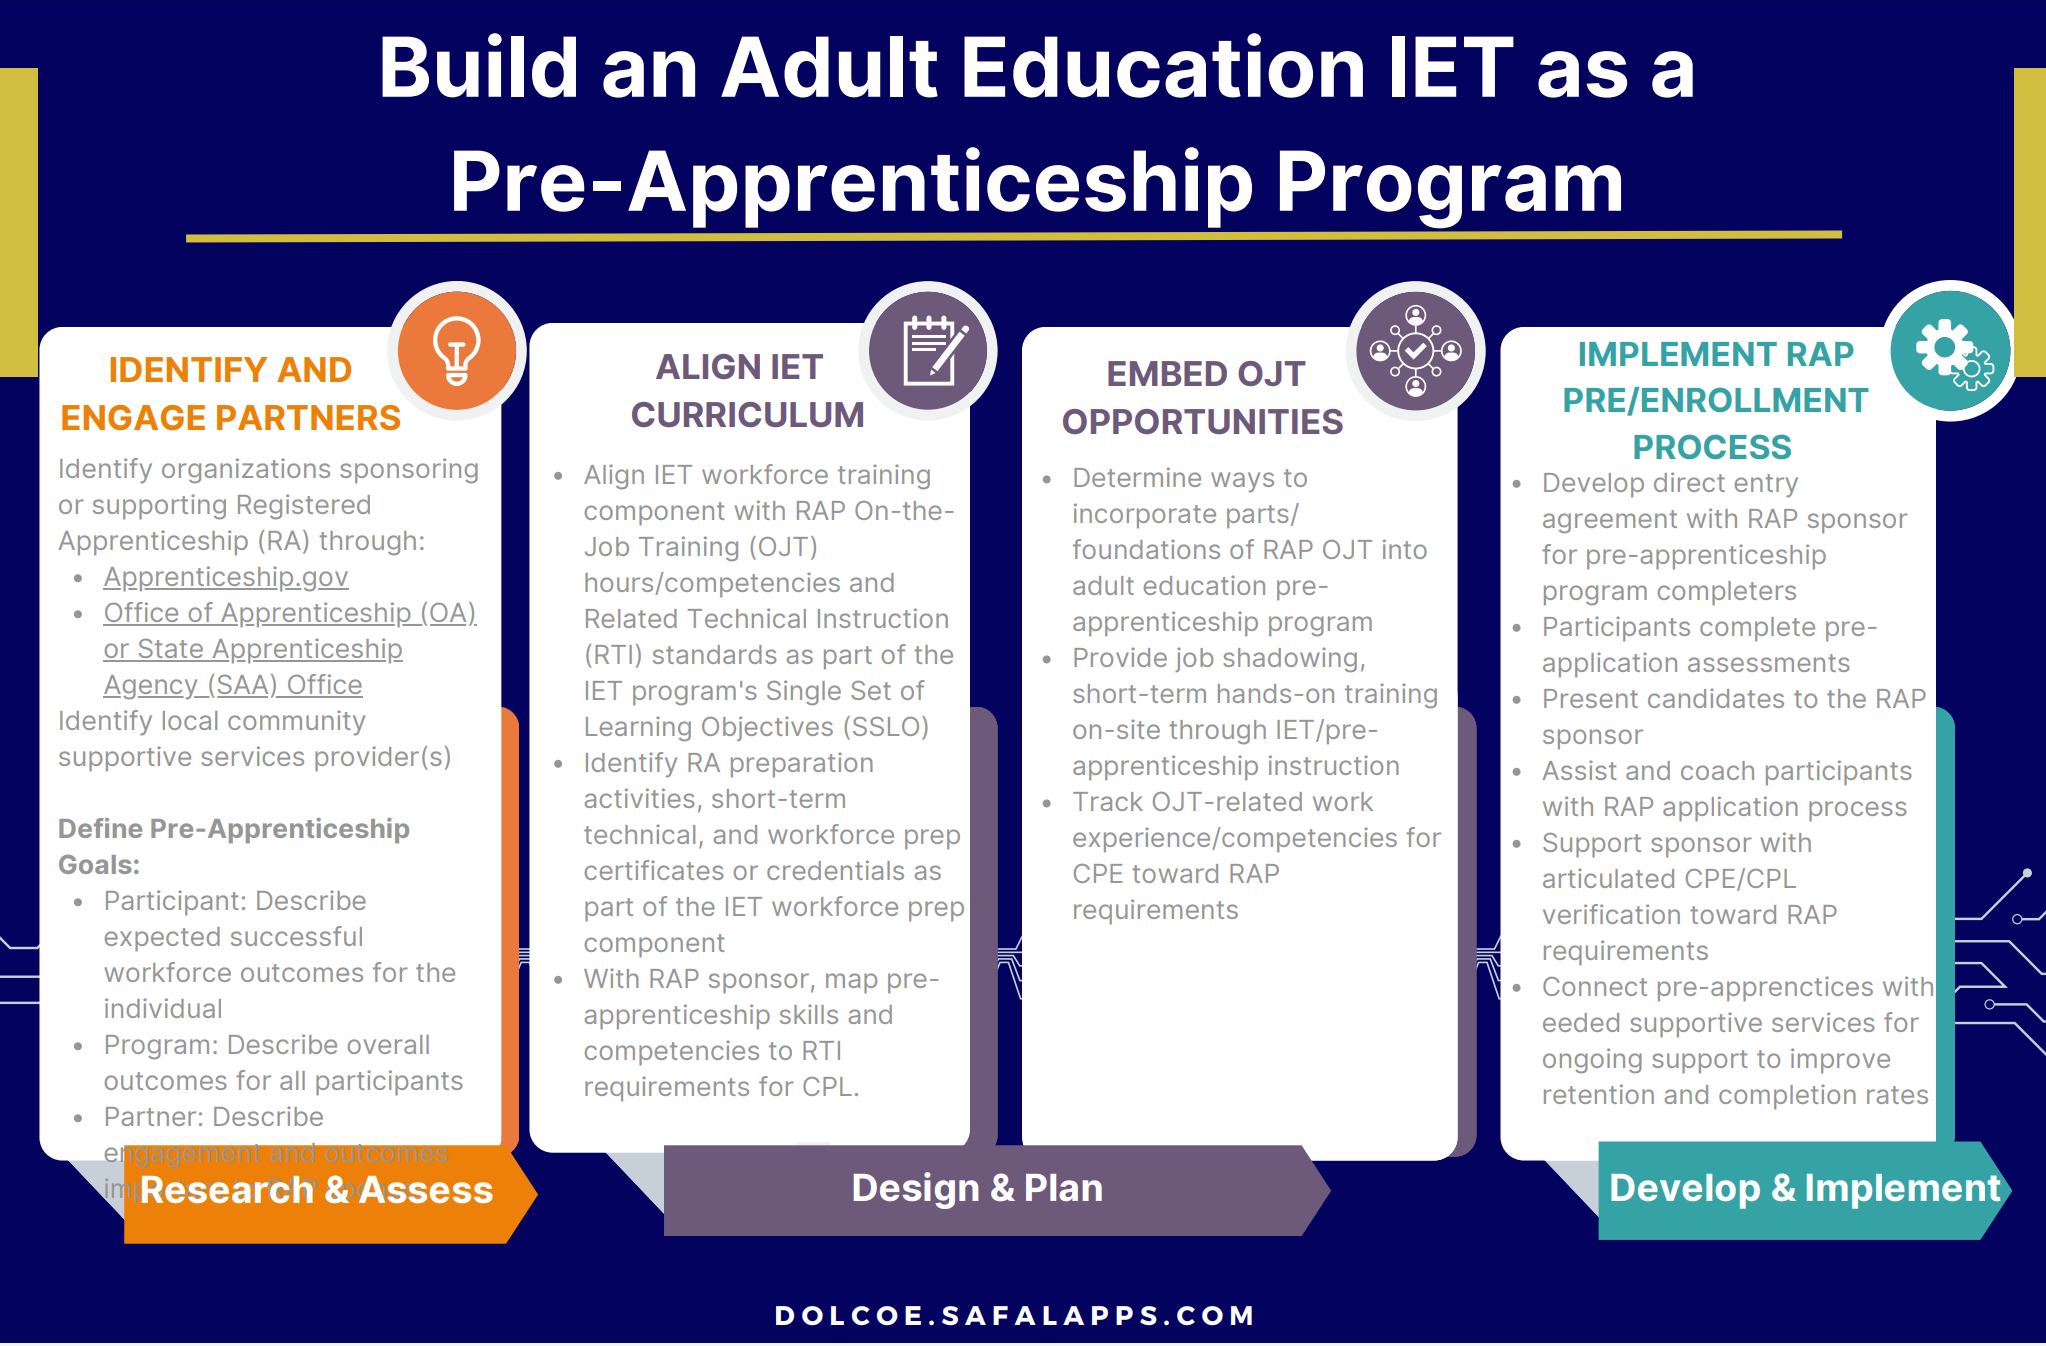 Build an Adult Education Integrated Education Training as a Pre-Apprenticeship Program﻿